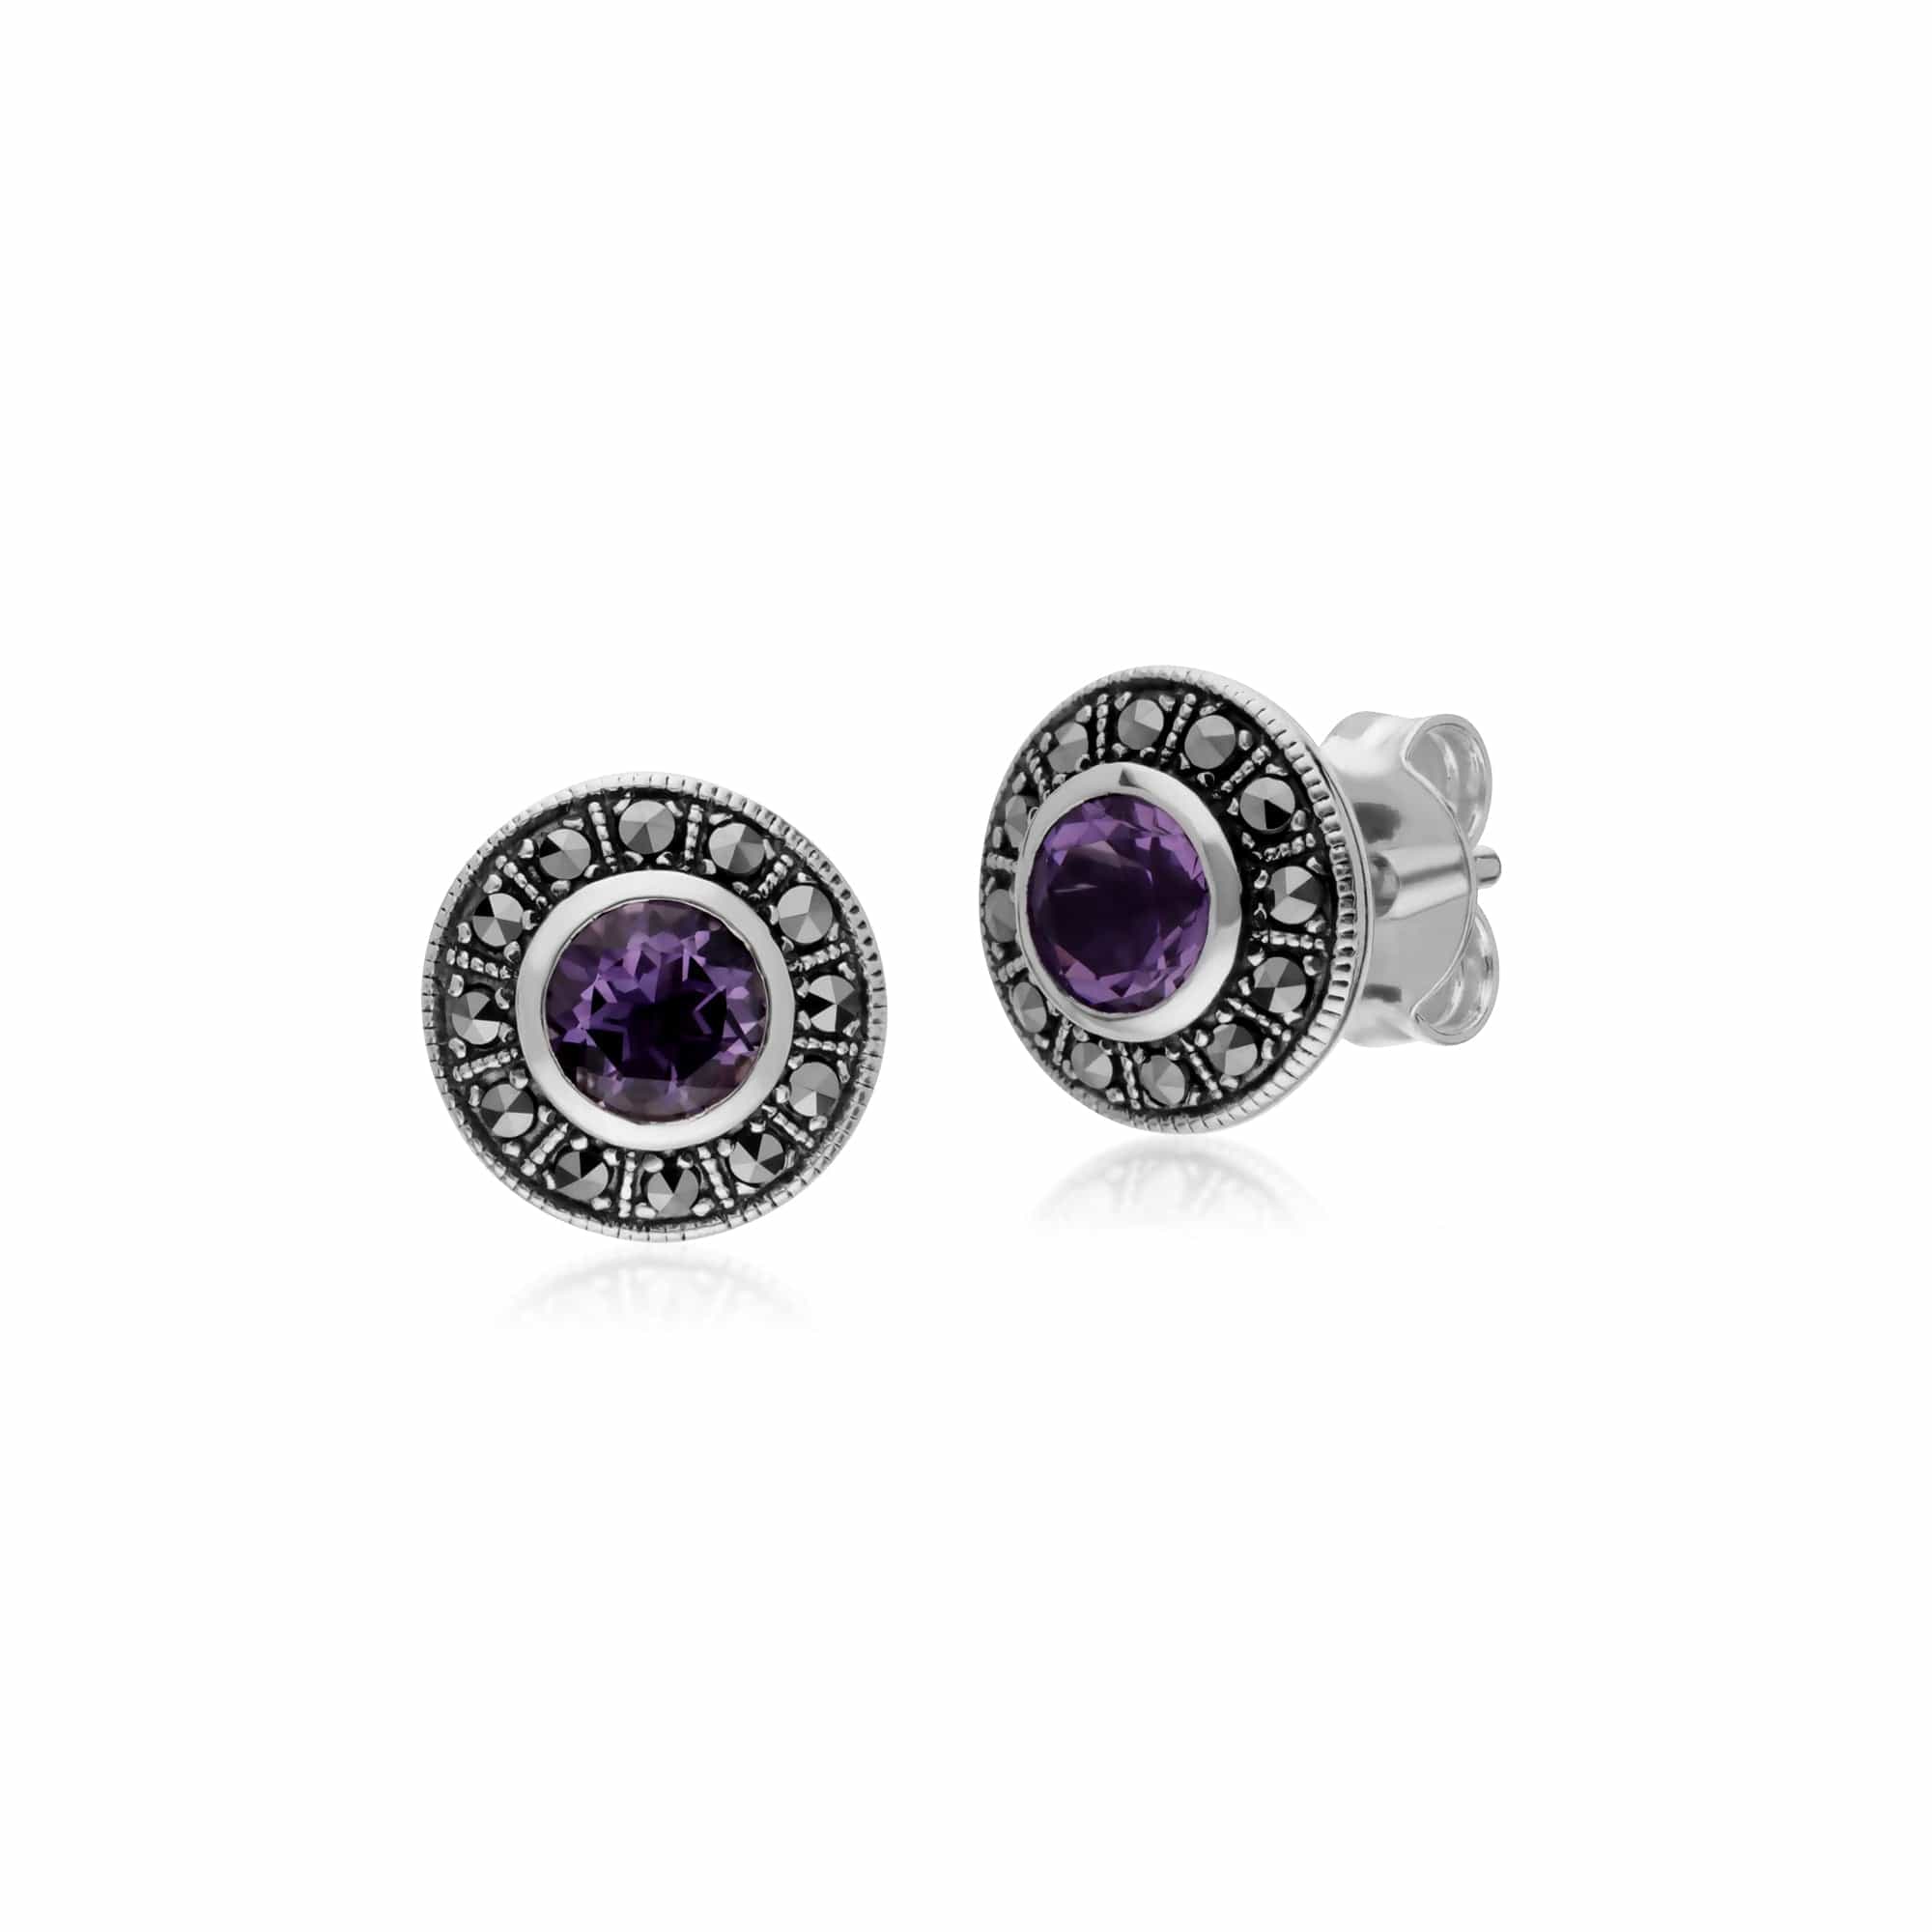 214E872701925-214R605601925 Art Deco Style Round Amethyst and Marcasite Cluster Stud Earrings & Ring Set in 925 Sterling Silver 2